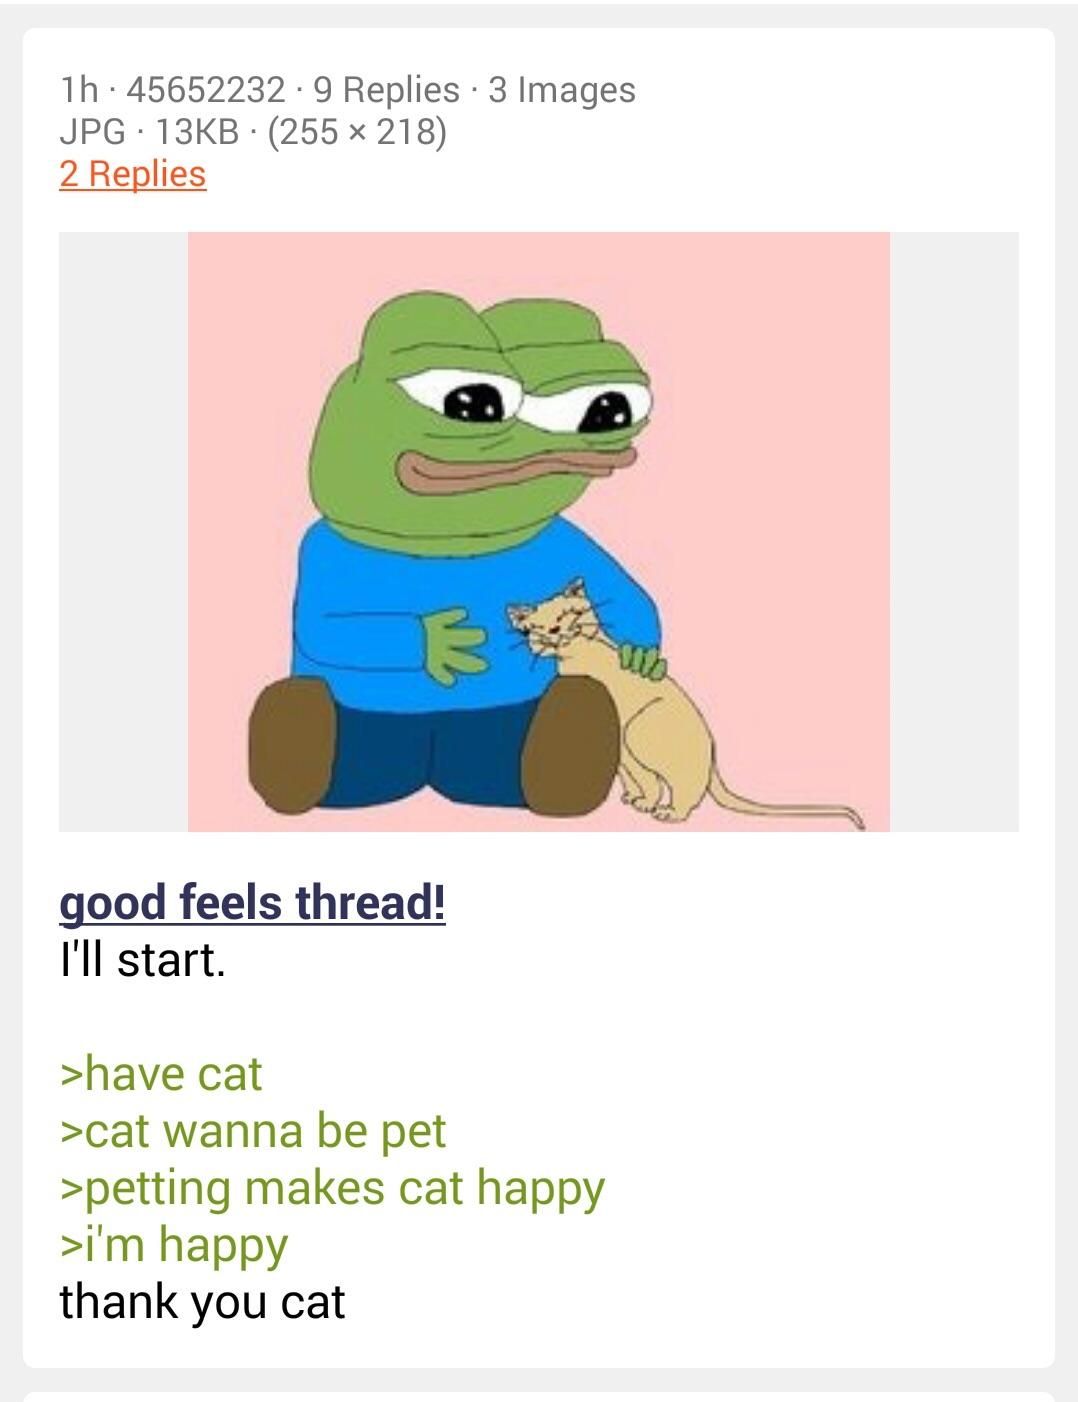 Anon is wholesome